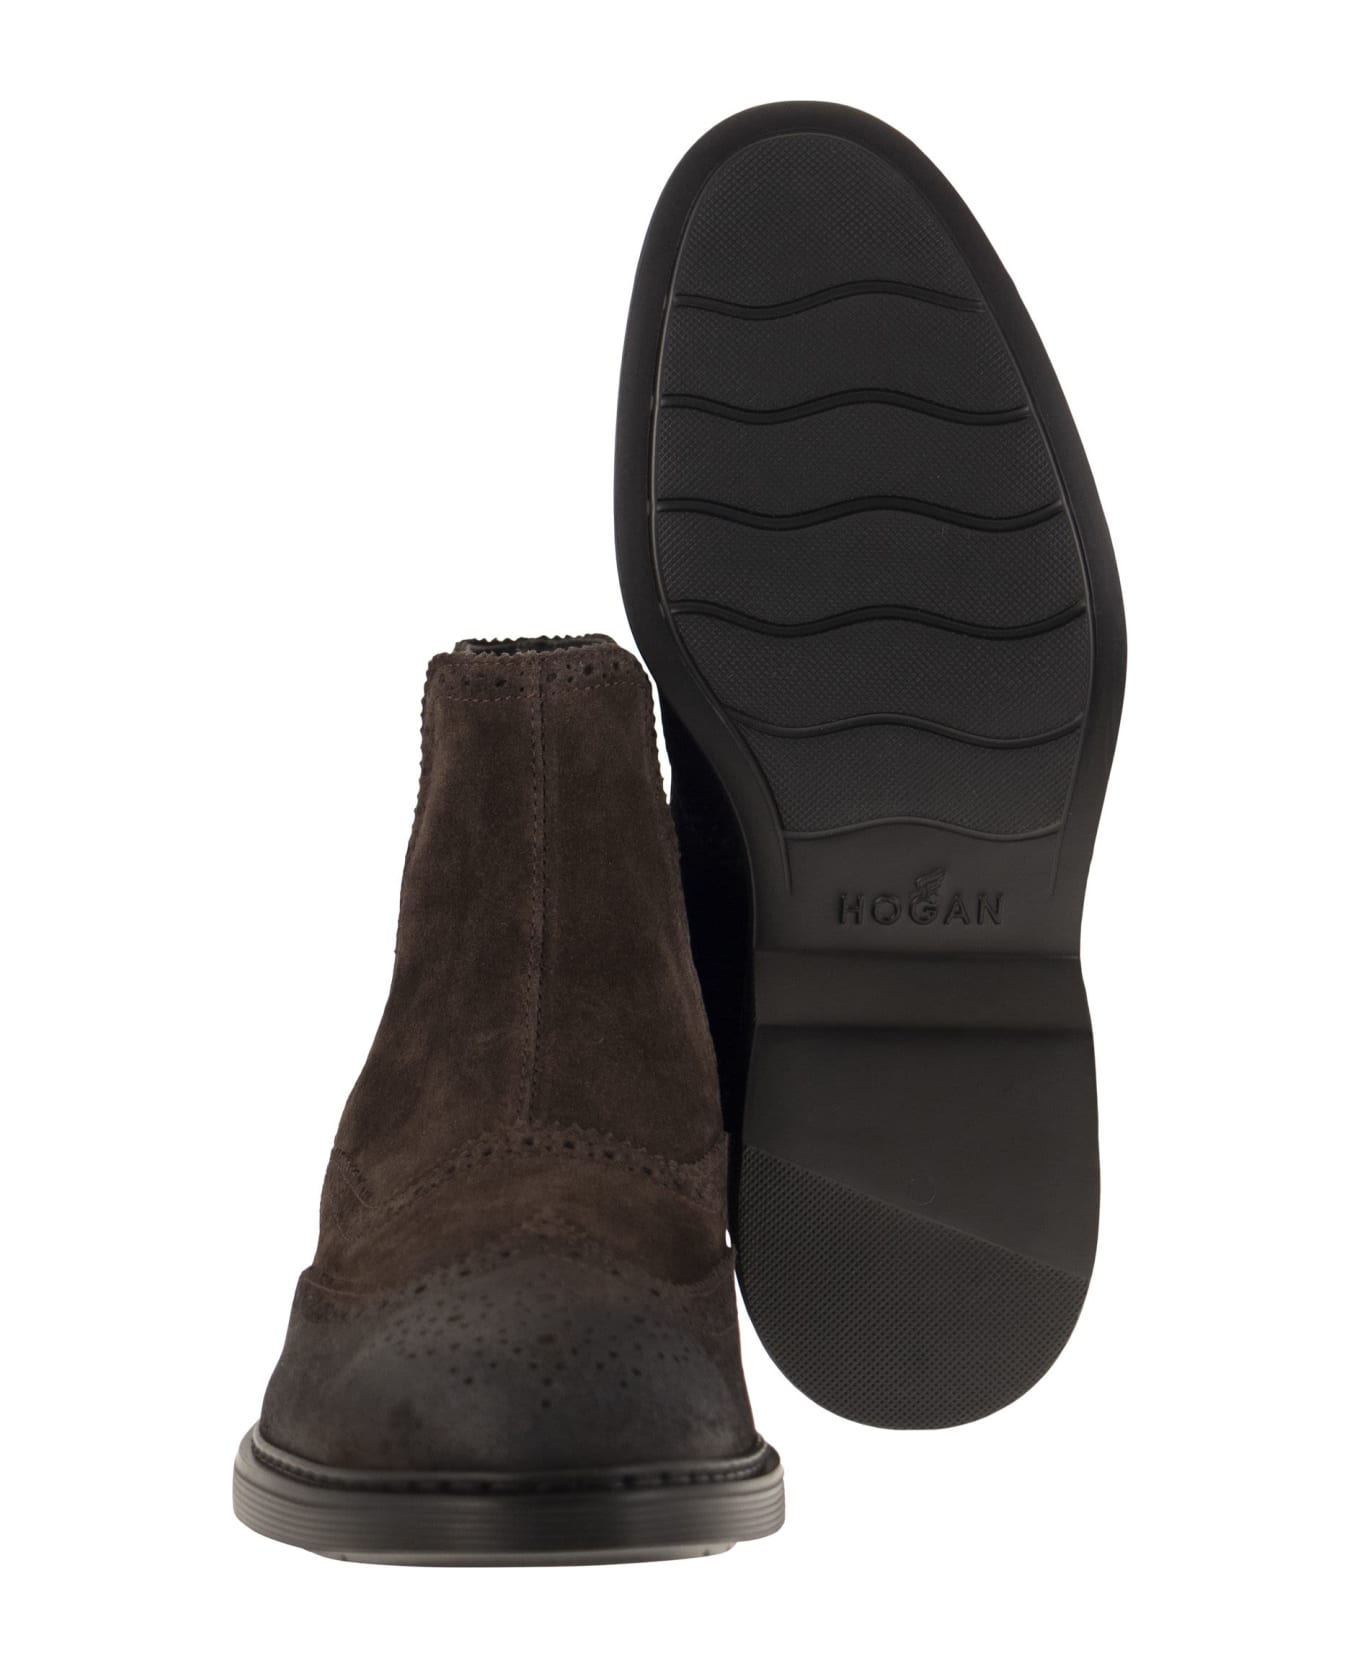 Hogan Chelsea Ankle Boots - Brown ブーツ